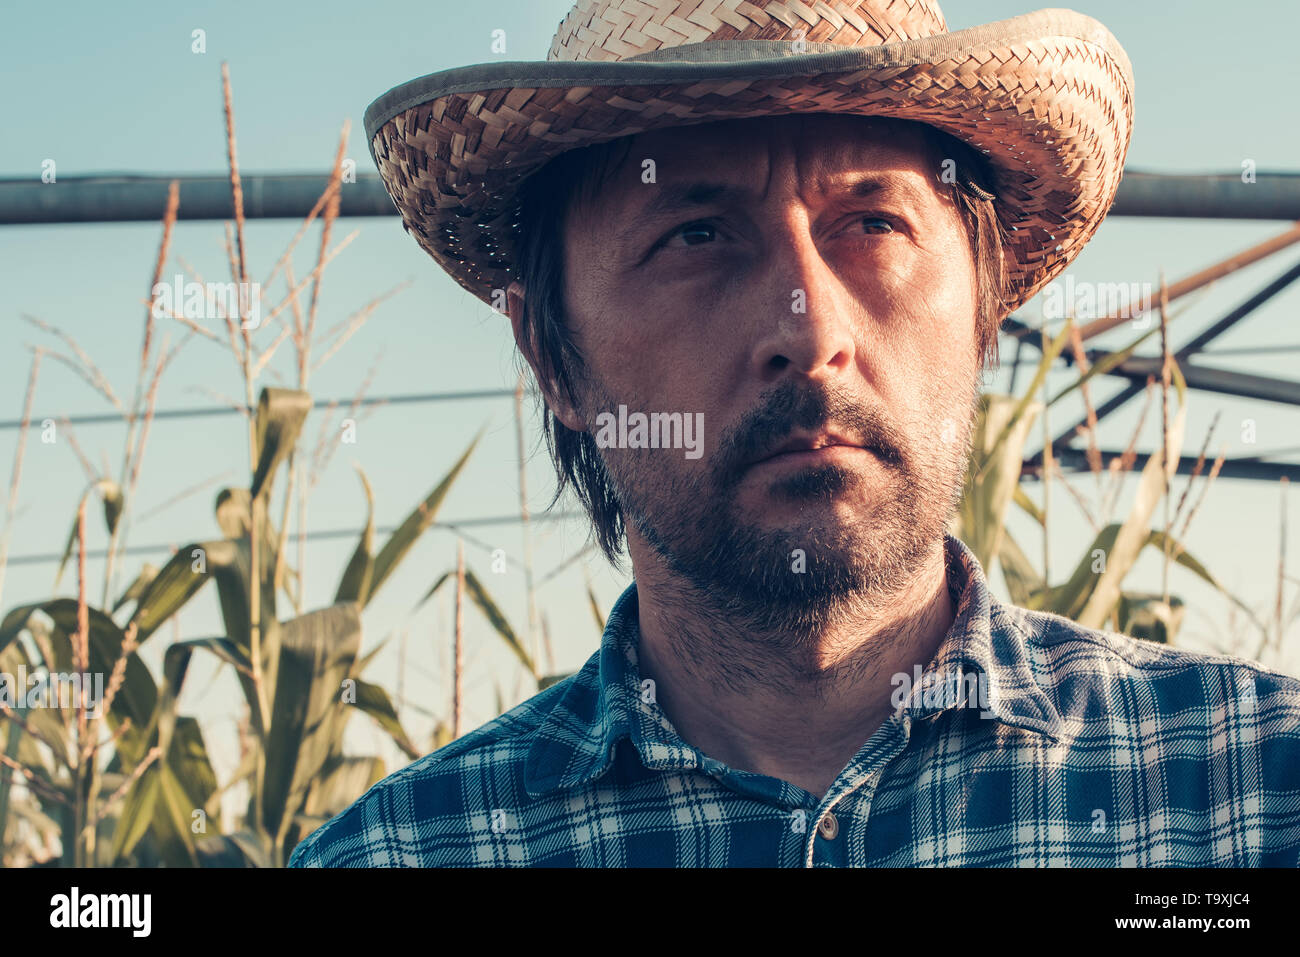 Serious thoughtful farmer in corn field, looking confident and determined Stock Photo